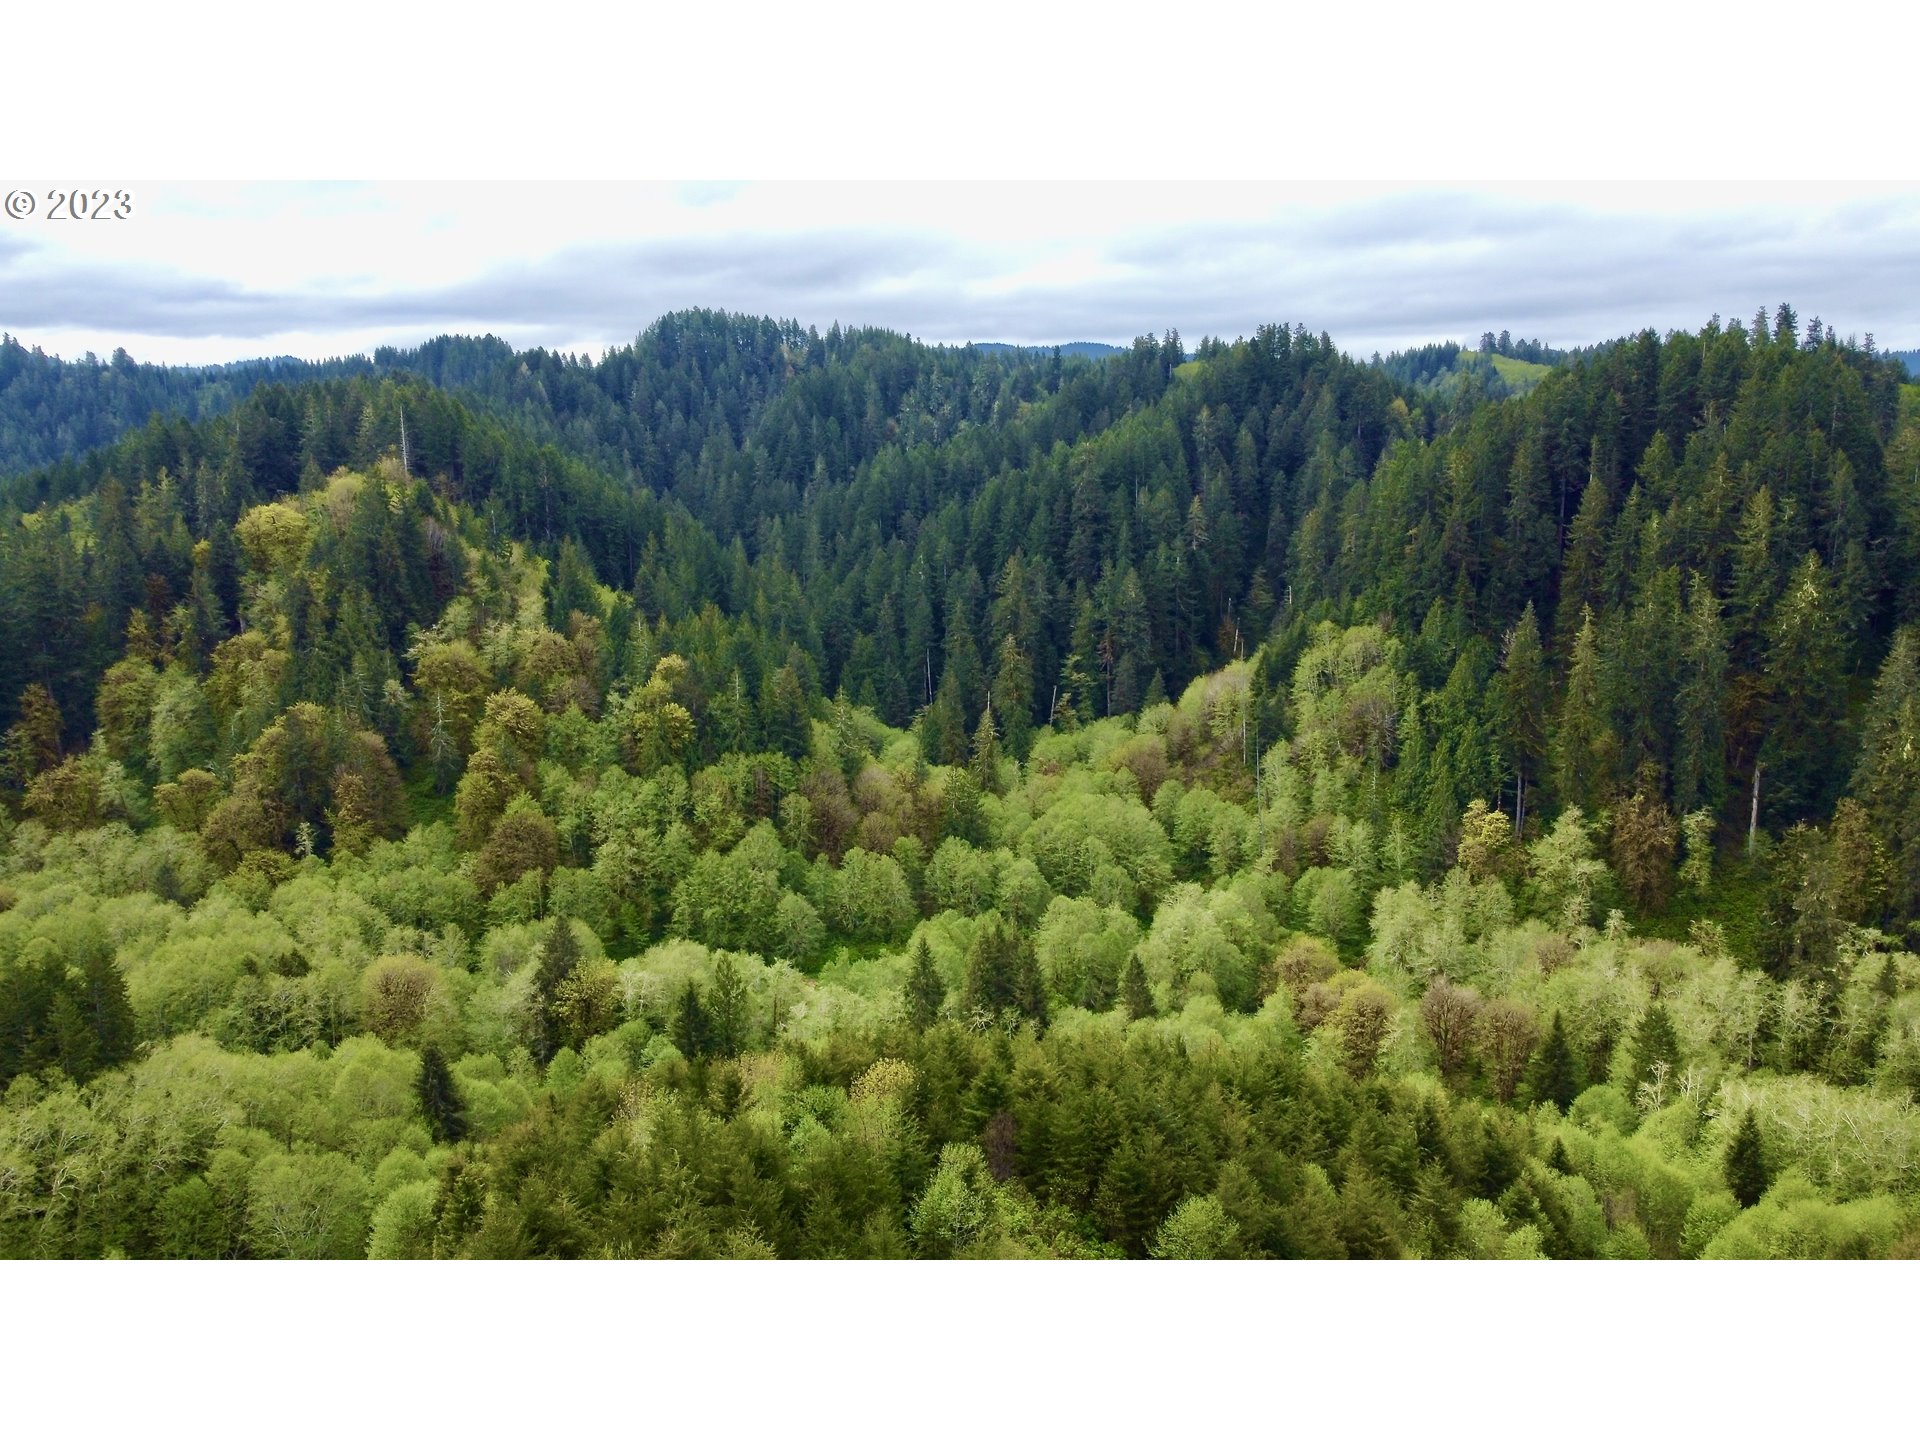 100AC Secluded and forested coast range get away. Beaver Creek runs through the center of the valley area with Maple trees in a gently sloped grove. E40 (Exclusive Farm Use Zone) and F1 zoning. Planted with Doug Fir and 1500 Red Cedar in 2017. Surrounded by sloped tree farms. Buyer do to all due Diligence. Tree Farm and Recreational dreams to be discovered Just over 5 miles from paved road. Incredible views, of the valley and mountain tops to explore in this forest retreat.